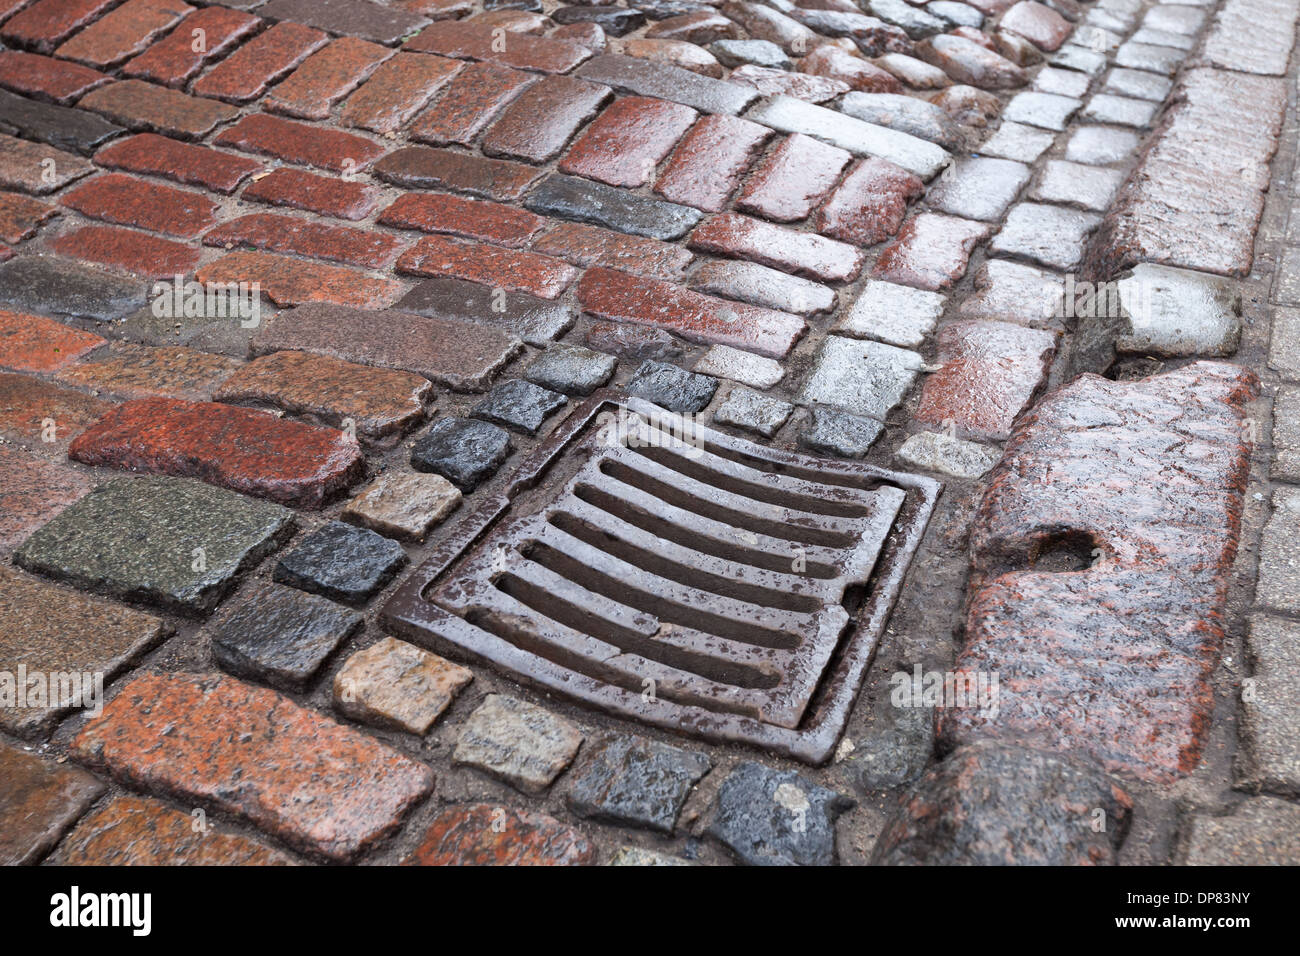 Wet drainage cover on stone pavement of urban road Stock Photo